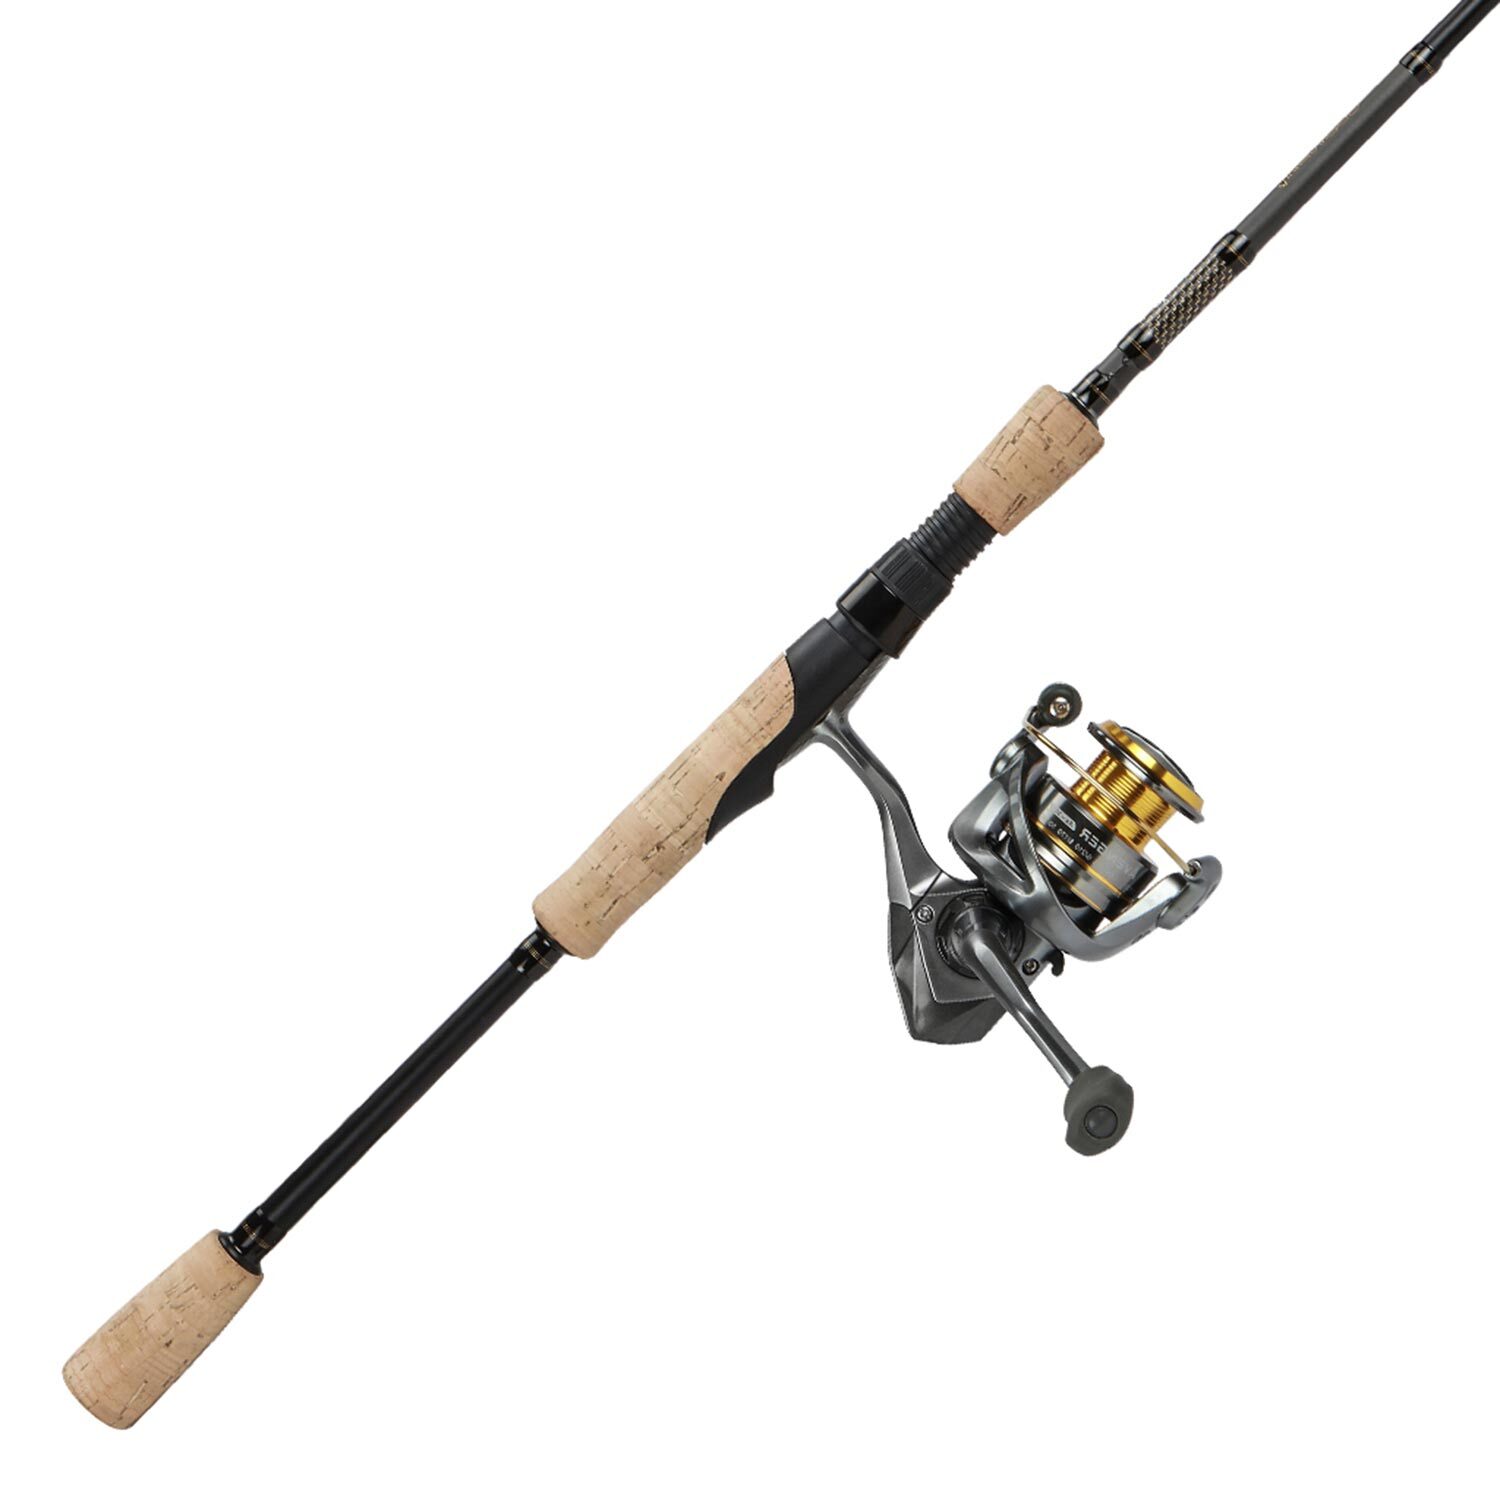  Okuma Boundary 7-Feet Medium Action 40 Sized Reel Spinning  Combo, Grey/Silver/Red : Spinning Rod And Reel Combos : Sports & Outdoors